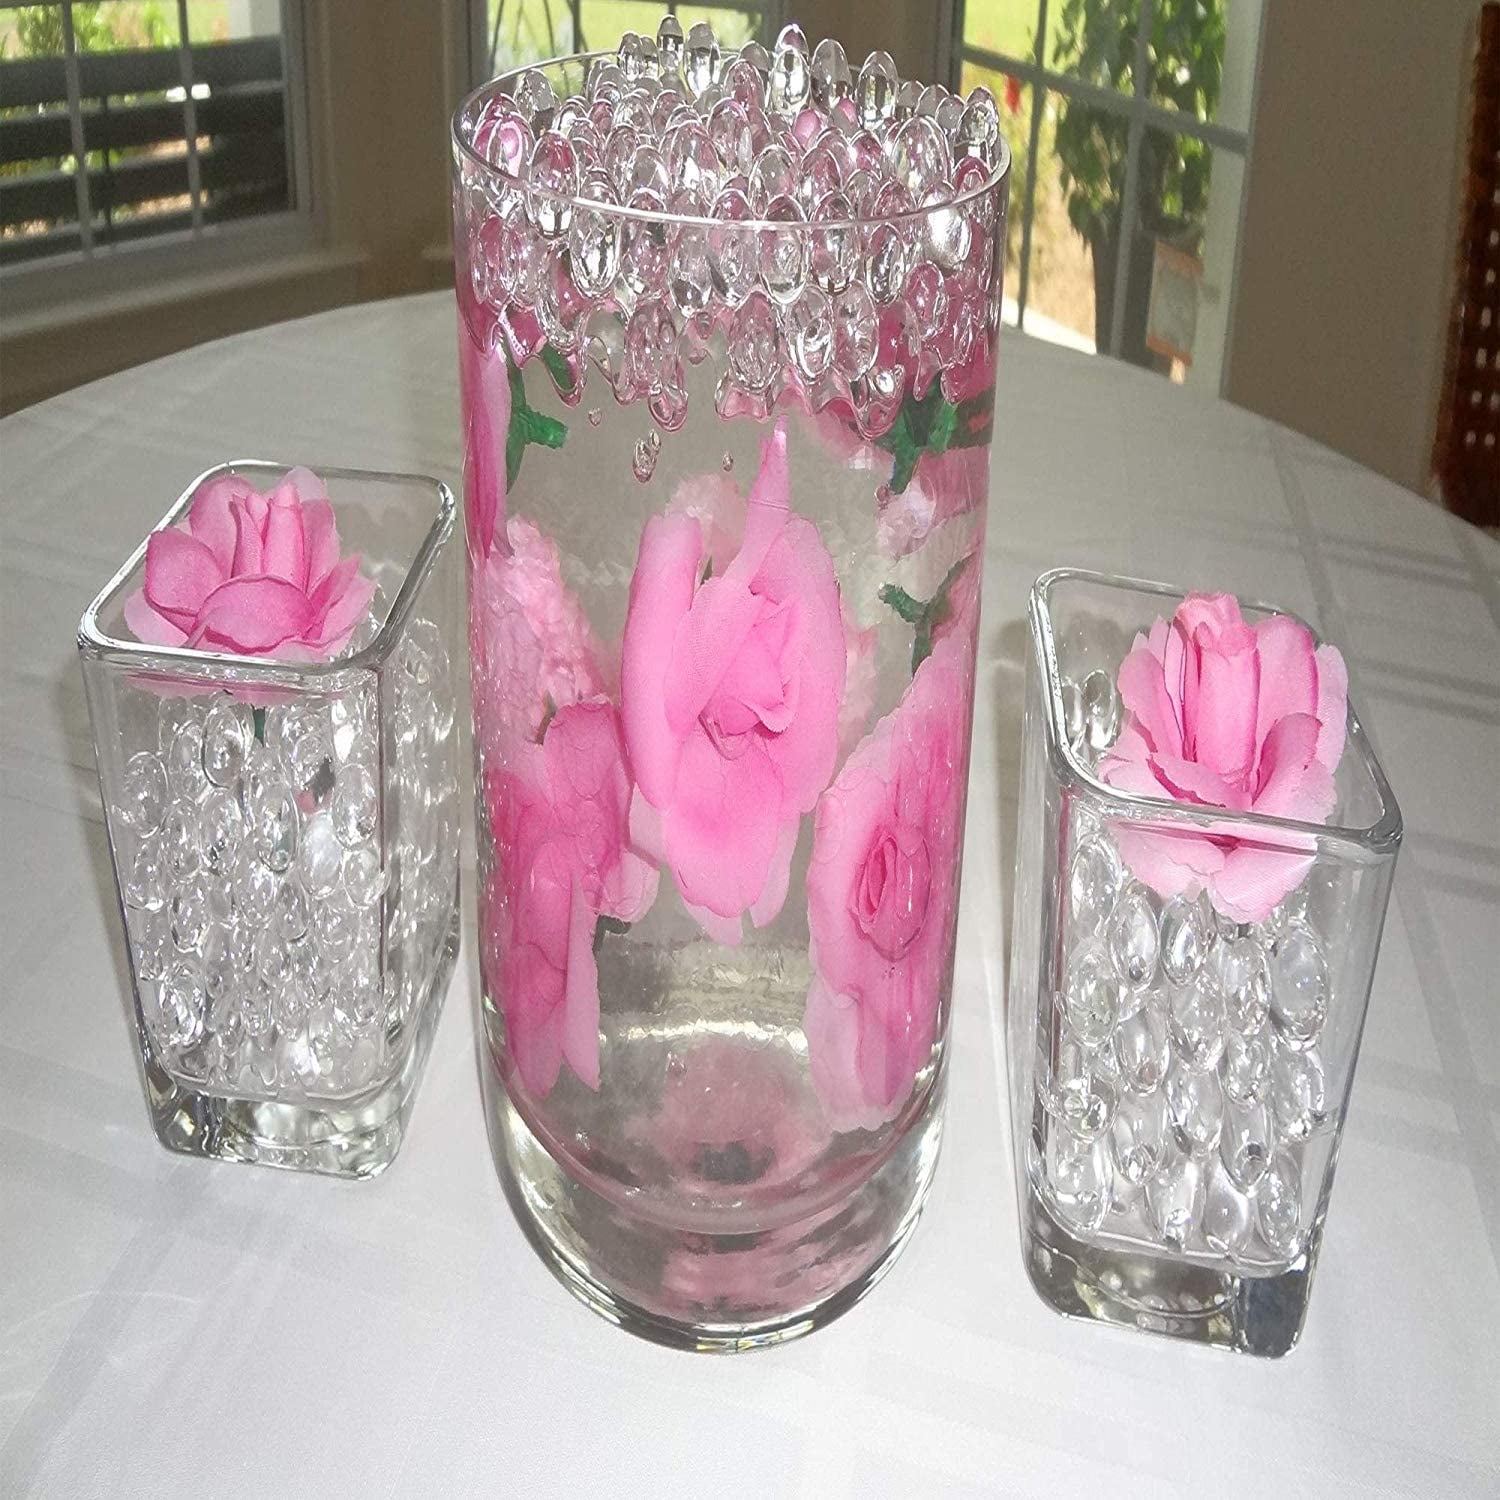 WATER CRYSTALS COLORFUL WEDDING VASE FILLER ICE GEL CENTERPIECE DECORATIONS 